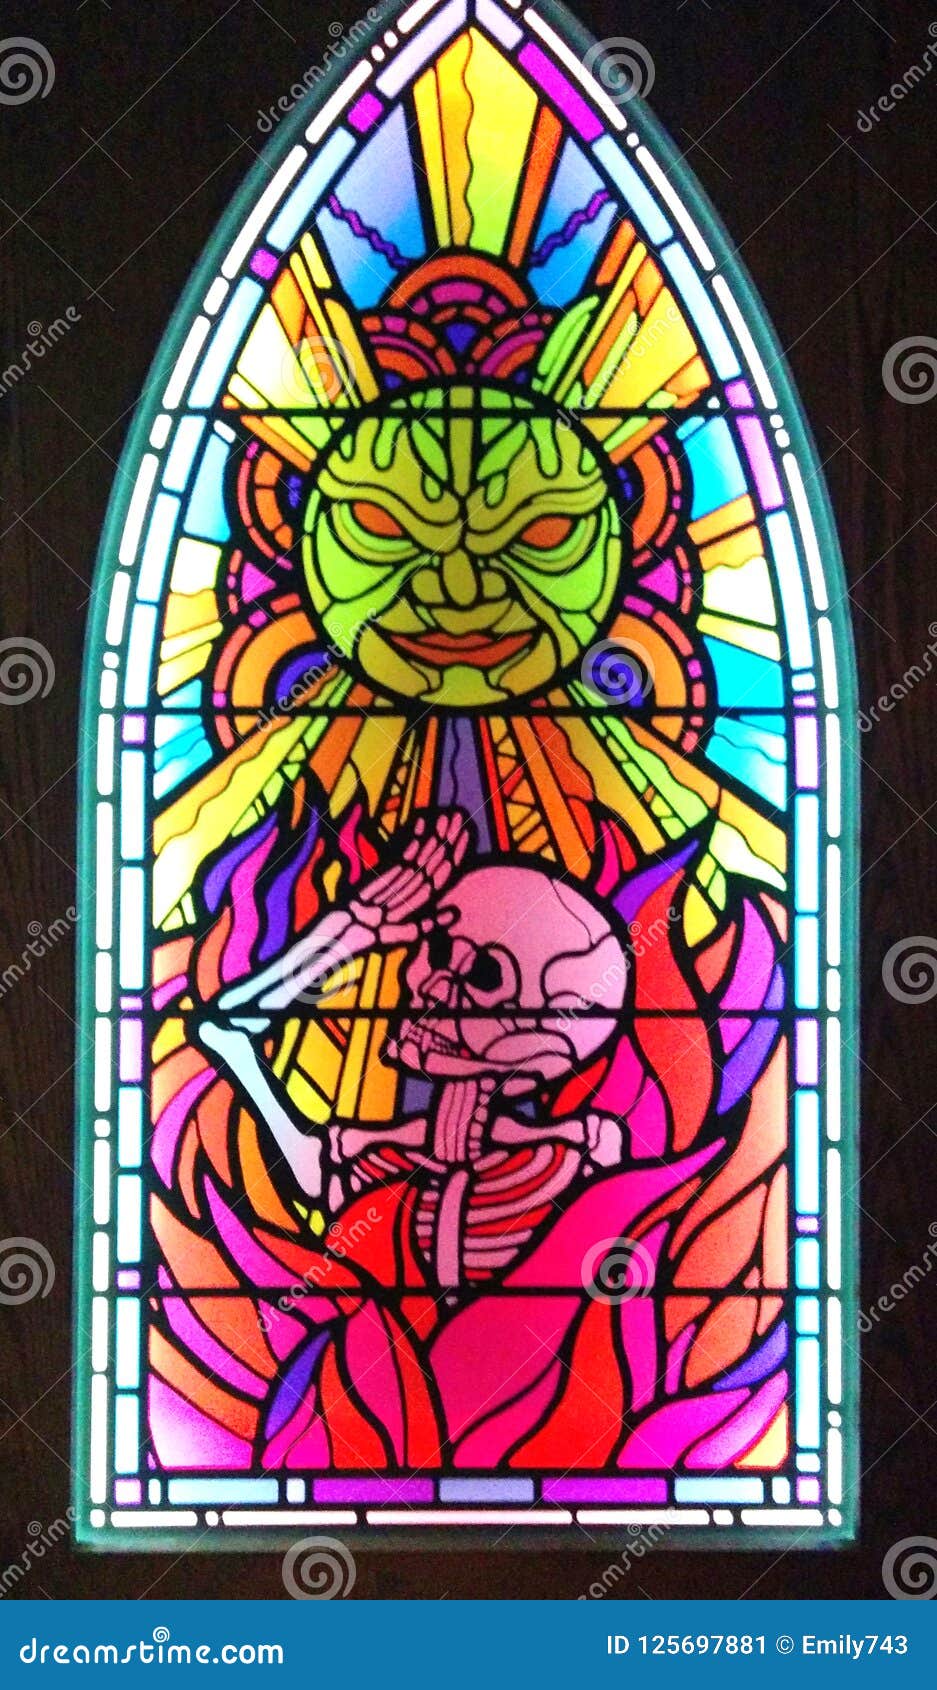 210 Glass Halloween Stained Photos Free Royalty Free Stock Photos From Dreamstime